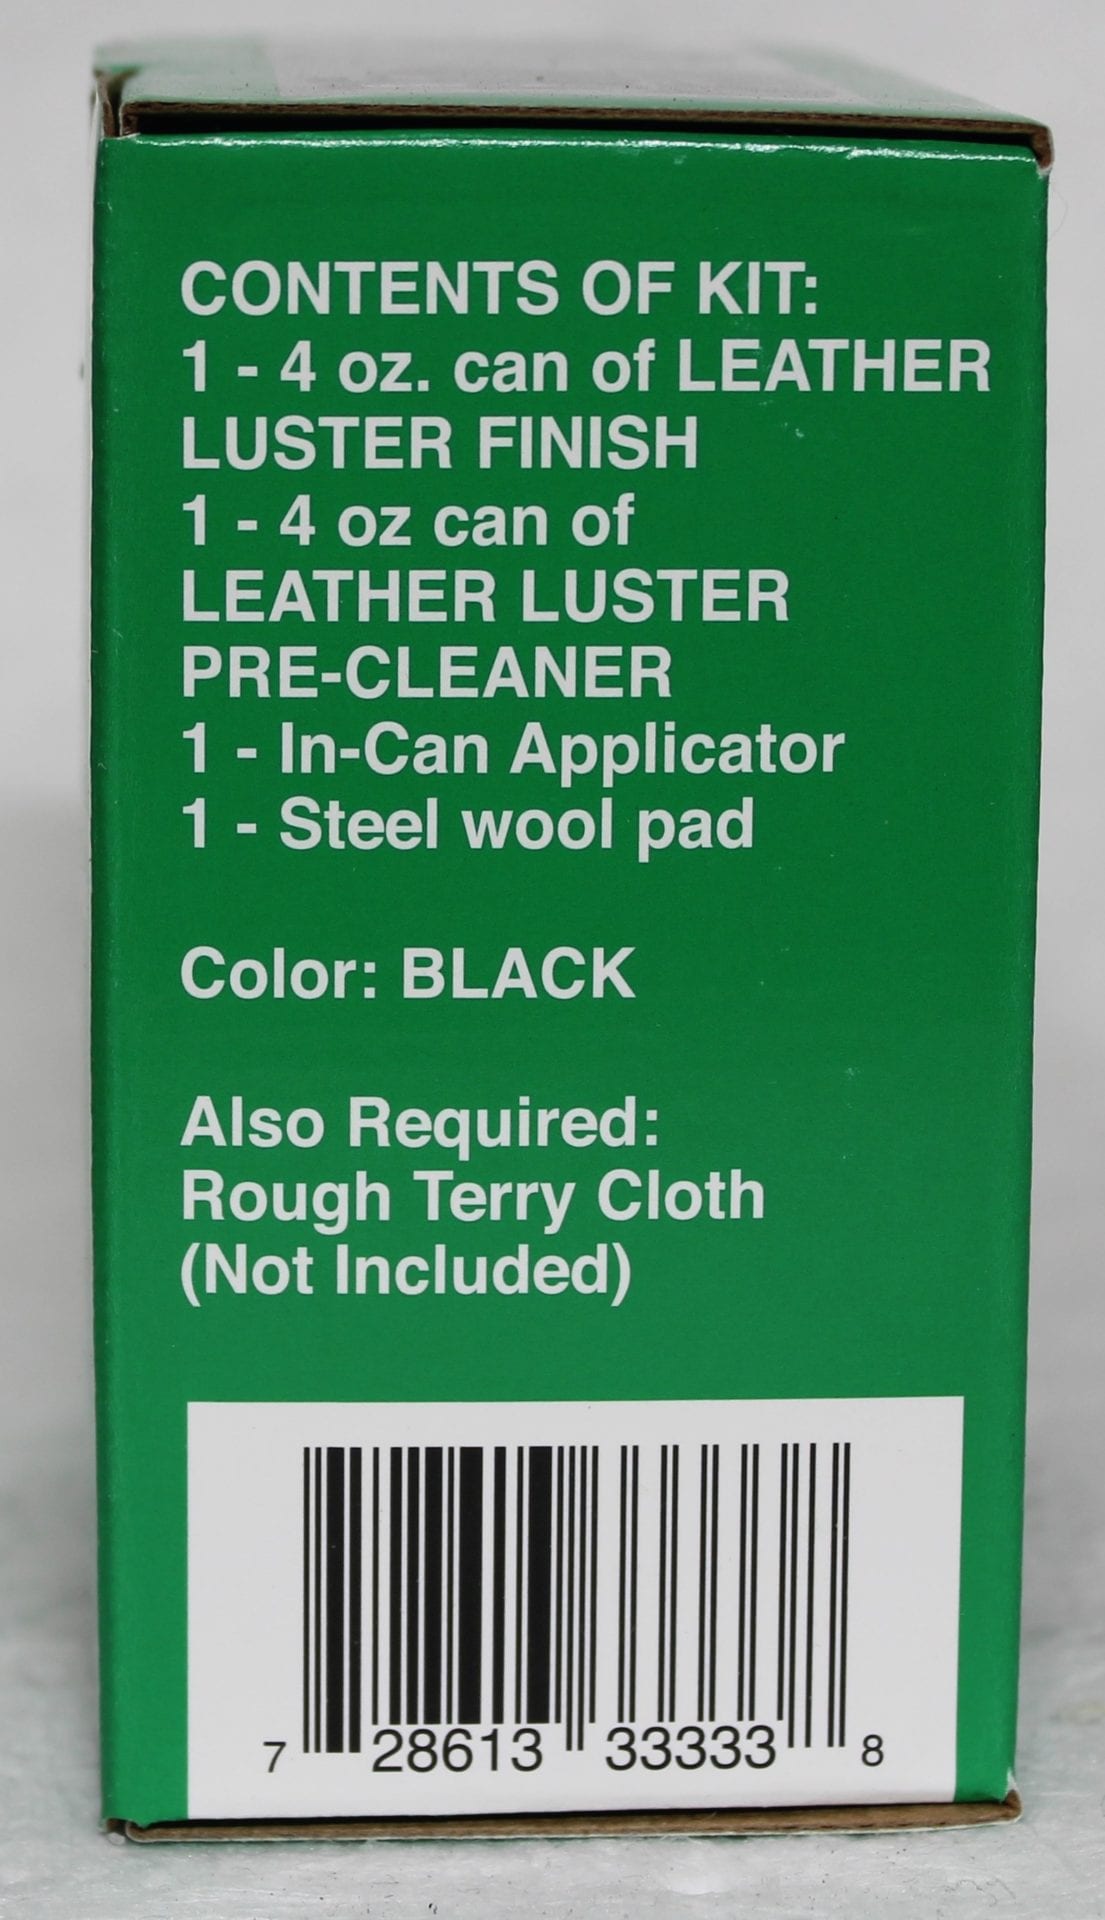 Leather Luster Kit - Leather Luster, Inc.